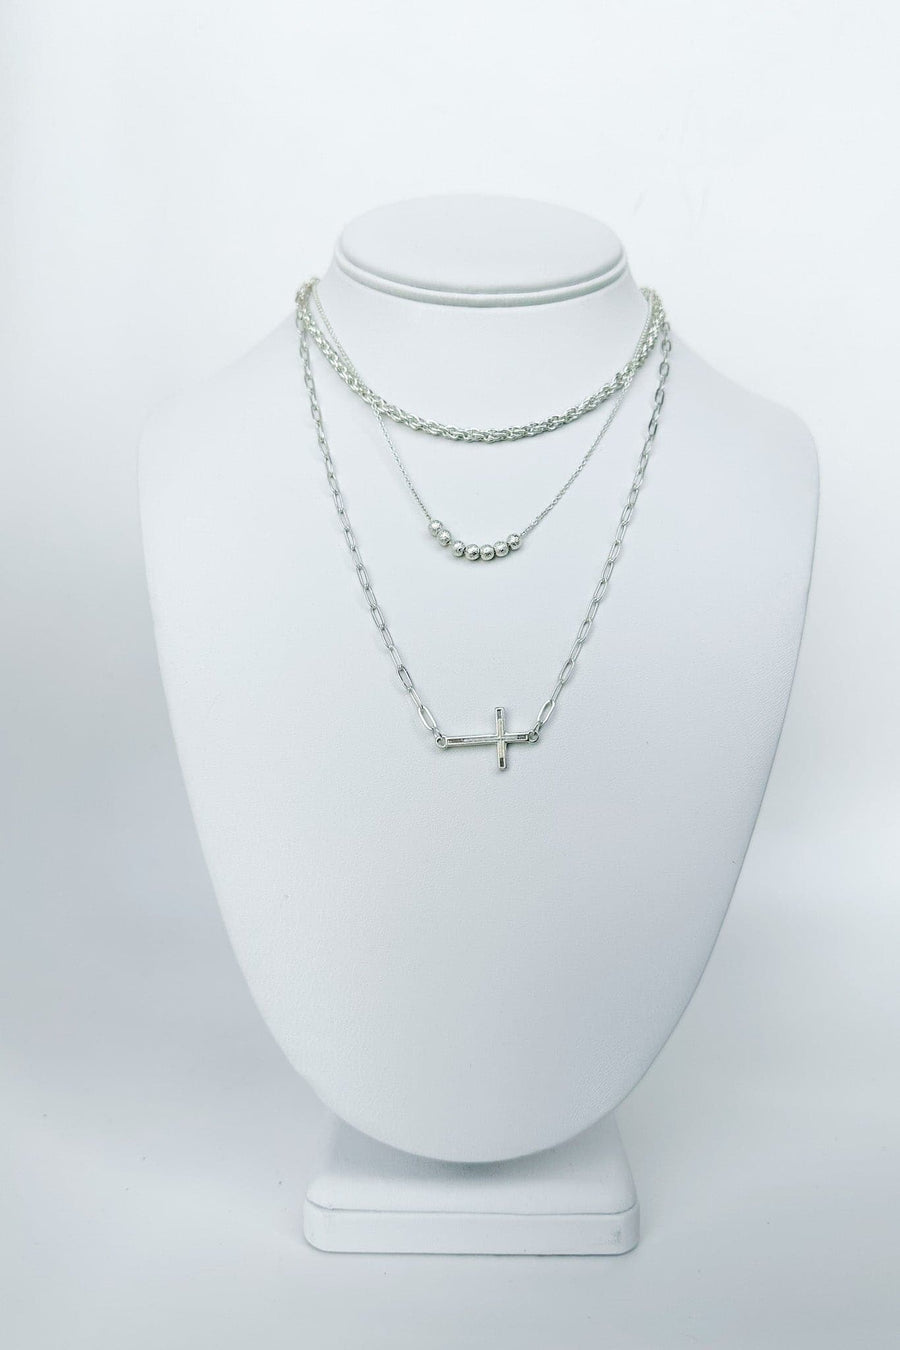 Silver Pomeline Cross Chain Layered Necklace - FINAL SALE - Madison and Mallory